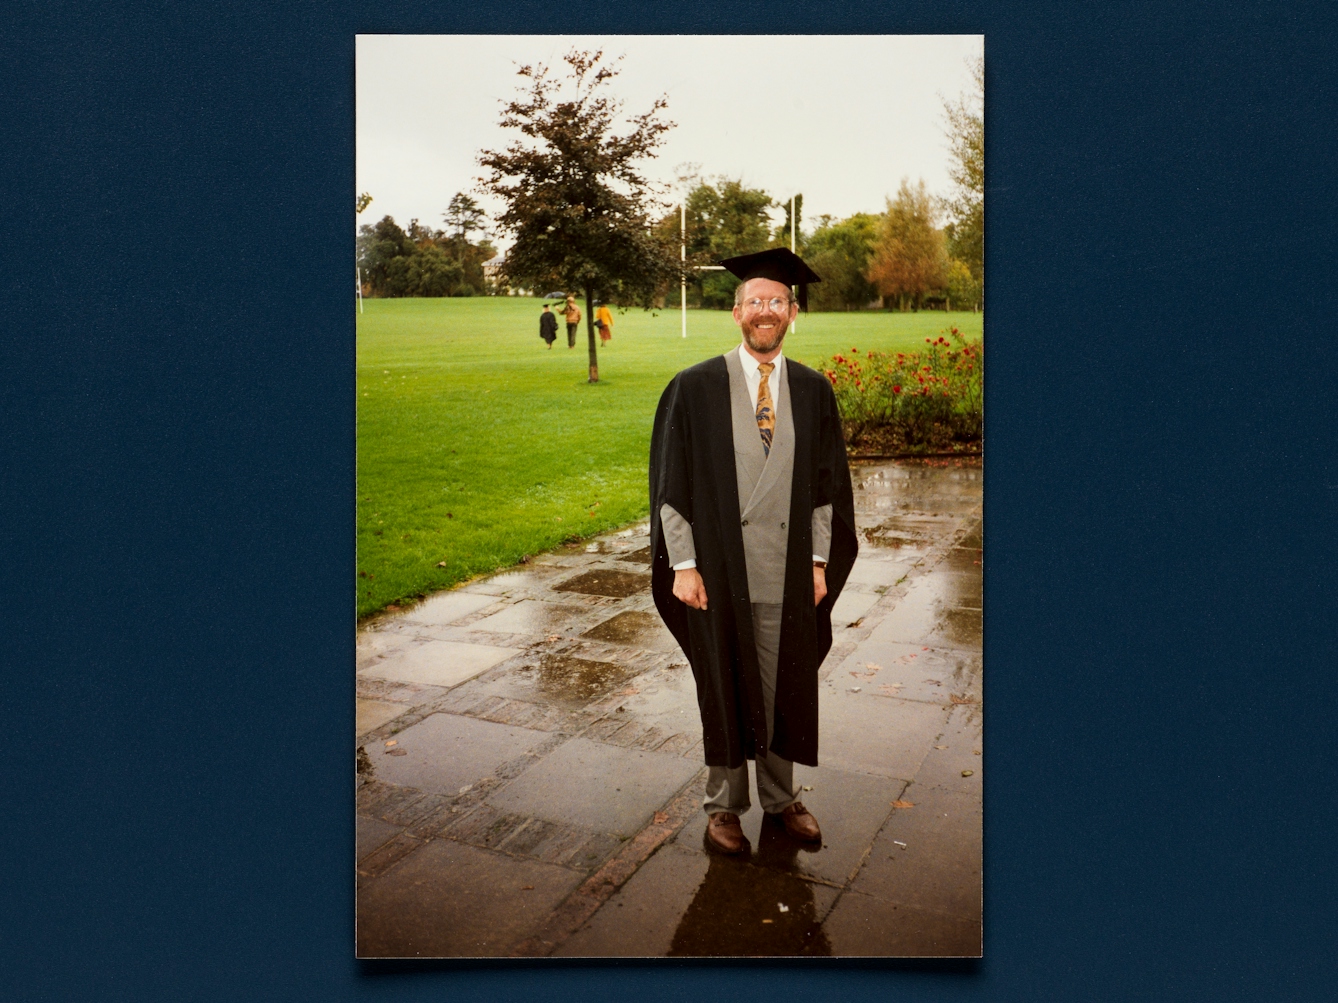 Photograph of a print of a colour photo resting on a deep blue background. The photo shows a full-length picture of a man in a grey suit with yellow tie, with glasses and a beard standing outside. He is wearing a graduation gown complete with mortar board.He is smiling to camera. Behind him is a rugby field and he is standing on paved area wet with an earlier rainfall.